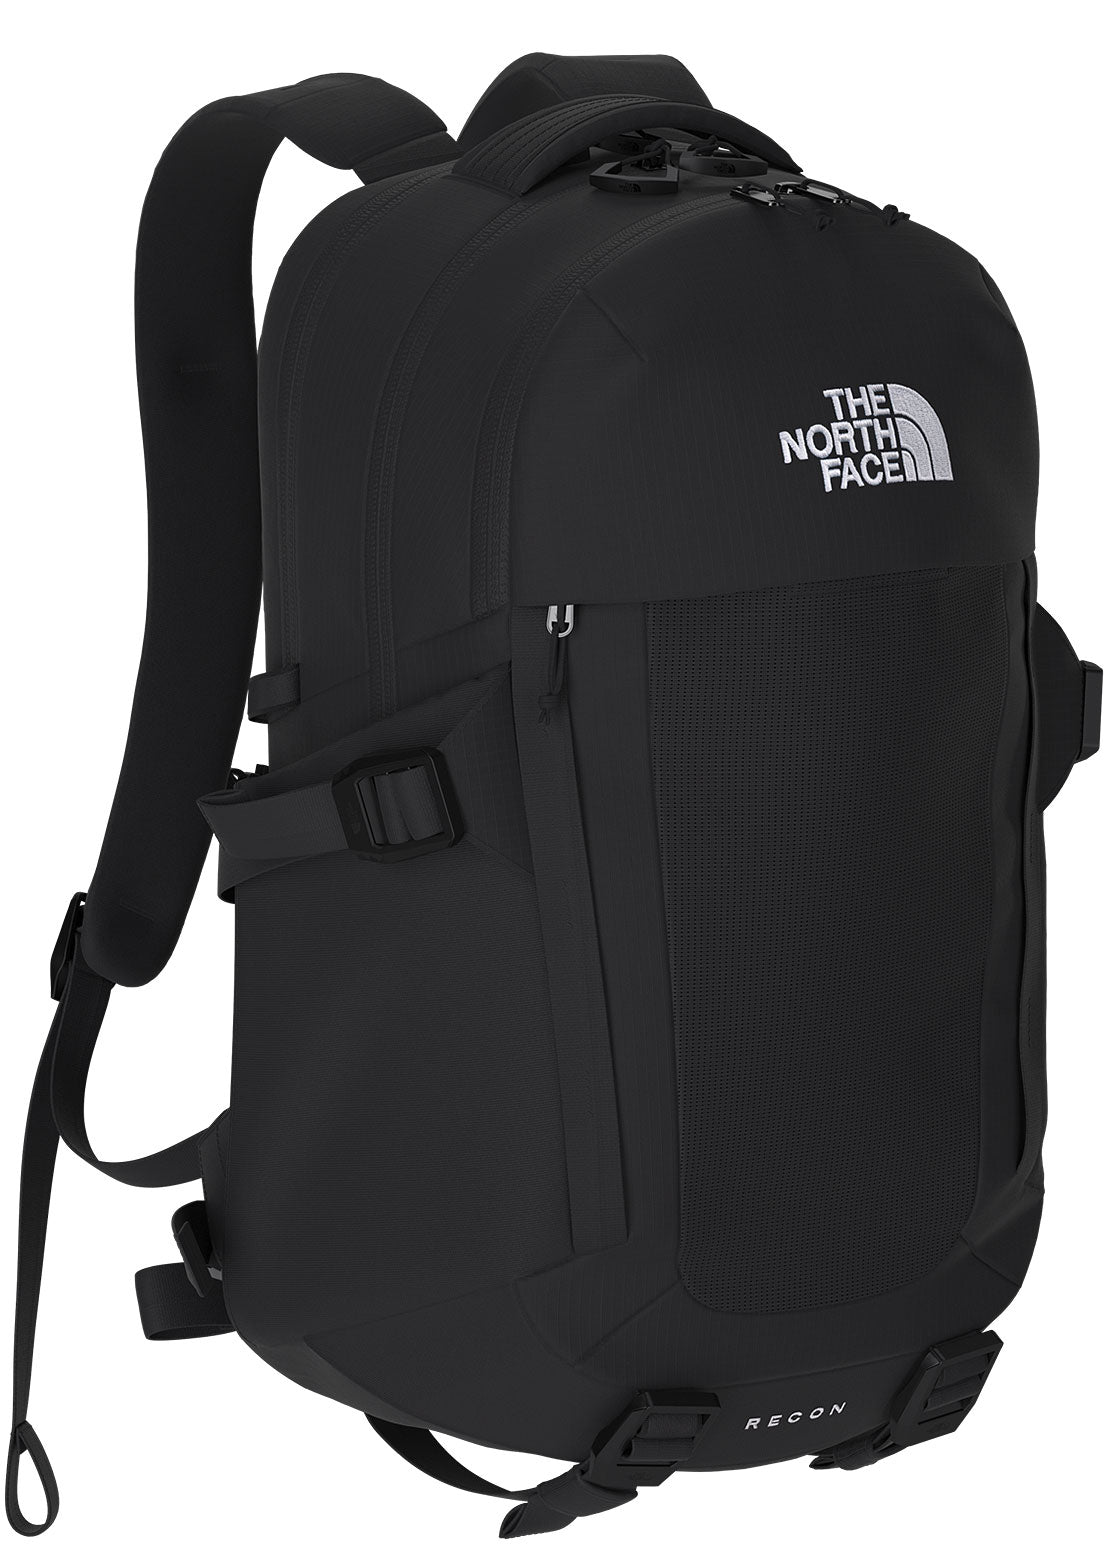 The North Face Recon Backpack TNF Black/TNF Black